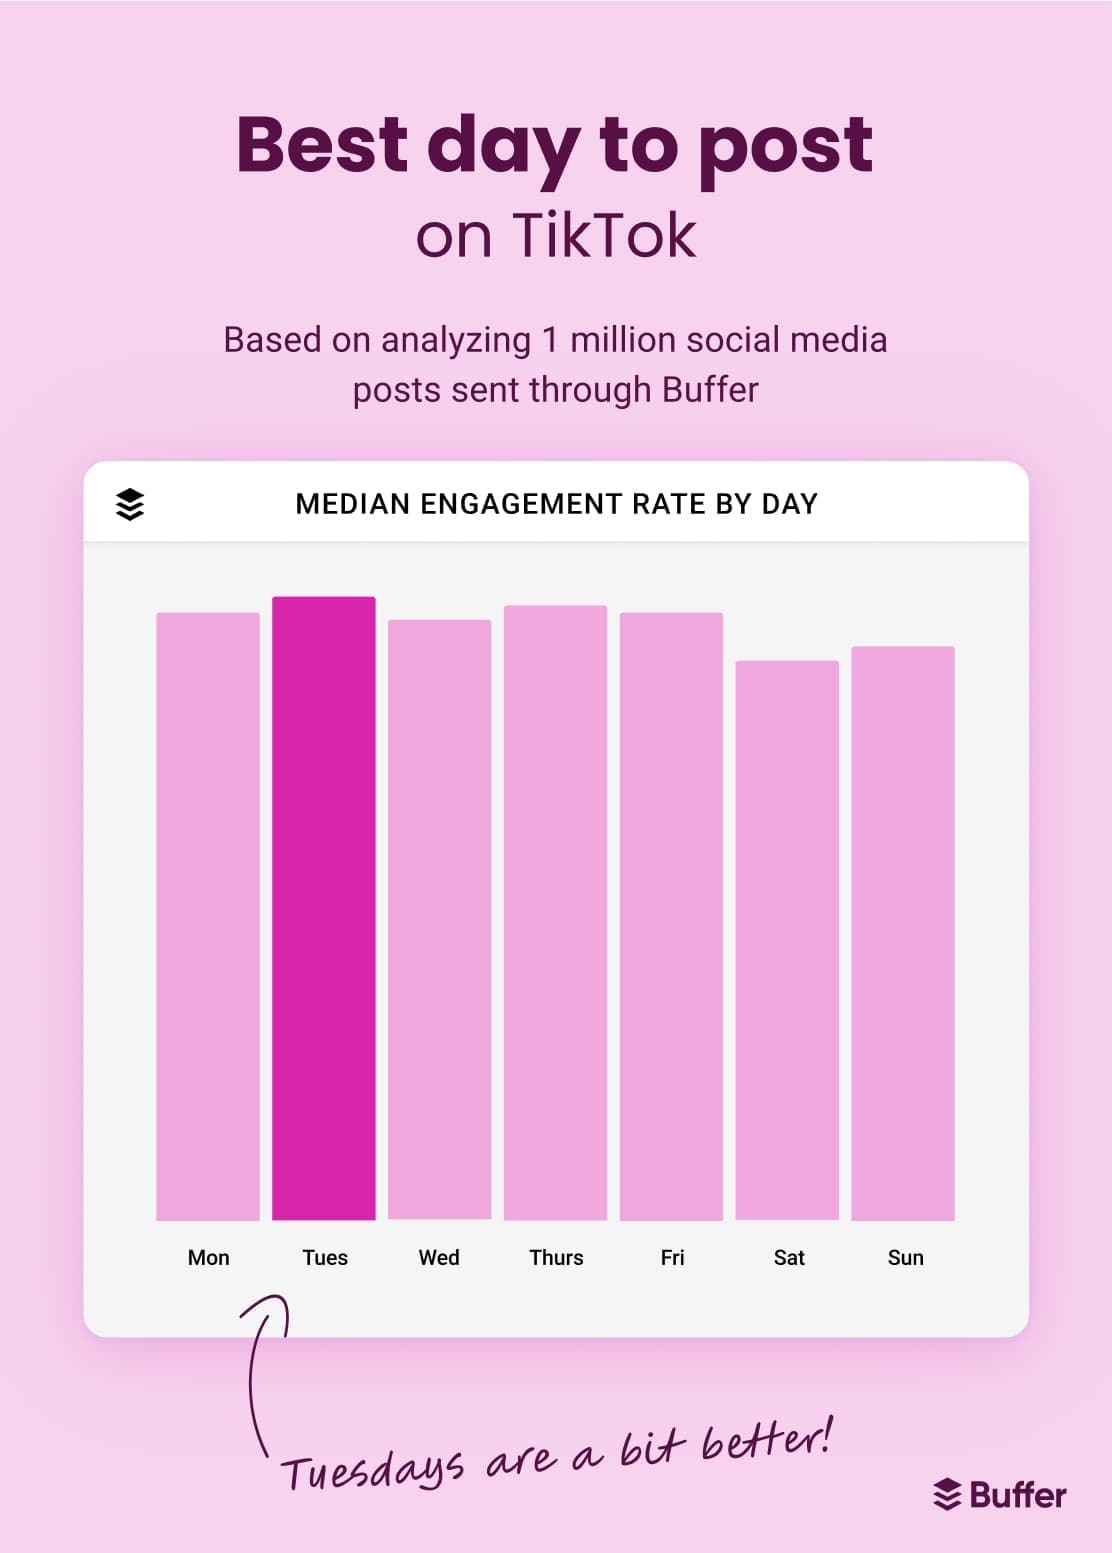 Bar chart of the best day to post on TikTok based on analyzing 1 million social media posts sent through Buffer displaying Tuesday as the best day to post, followed by Thursday, Monday, Friday, Wednesday, Sunday, and lastly Saturday.